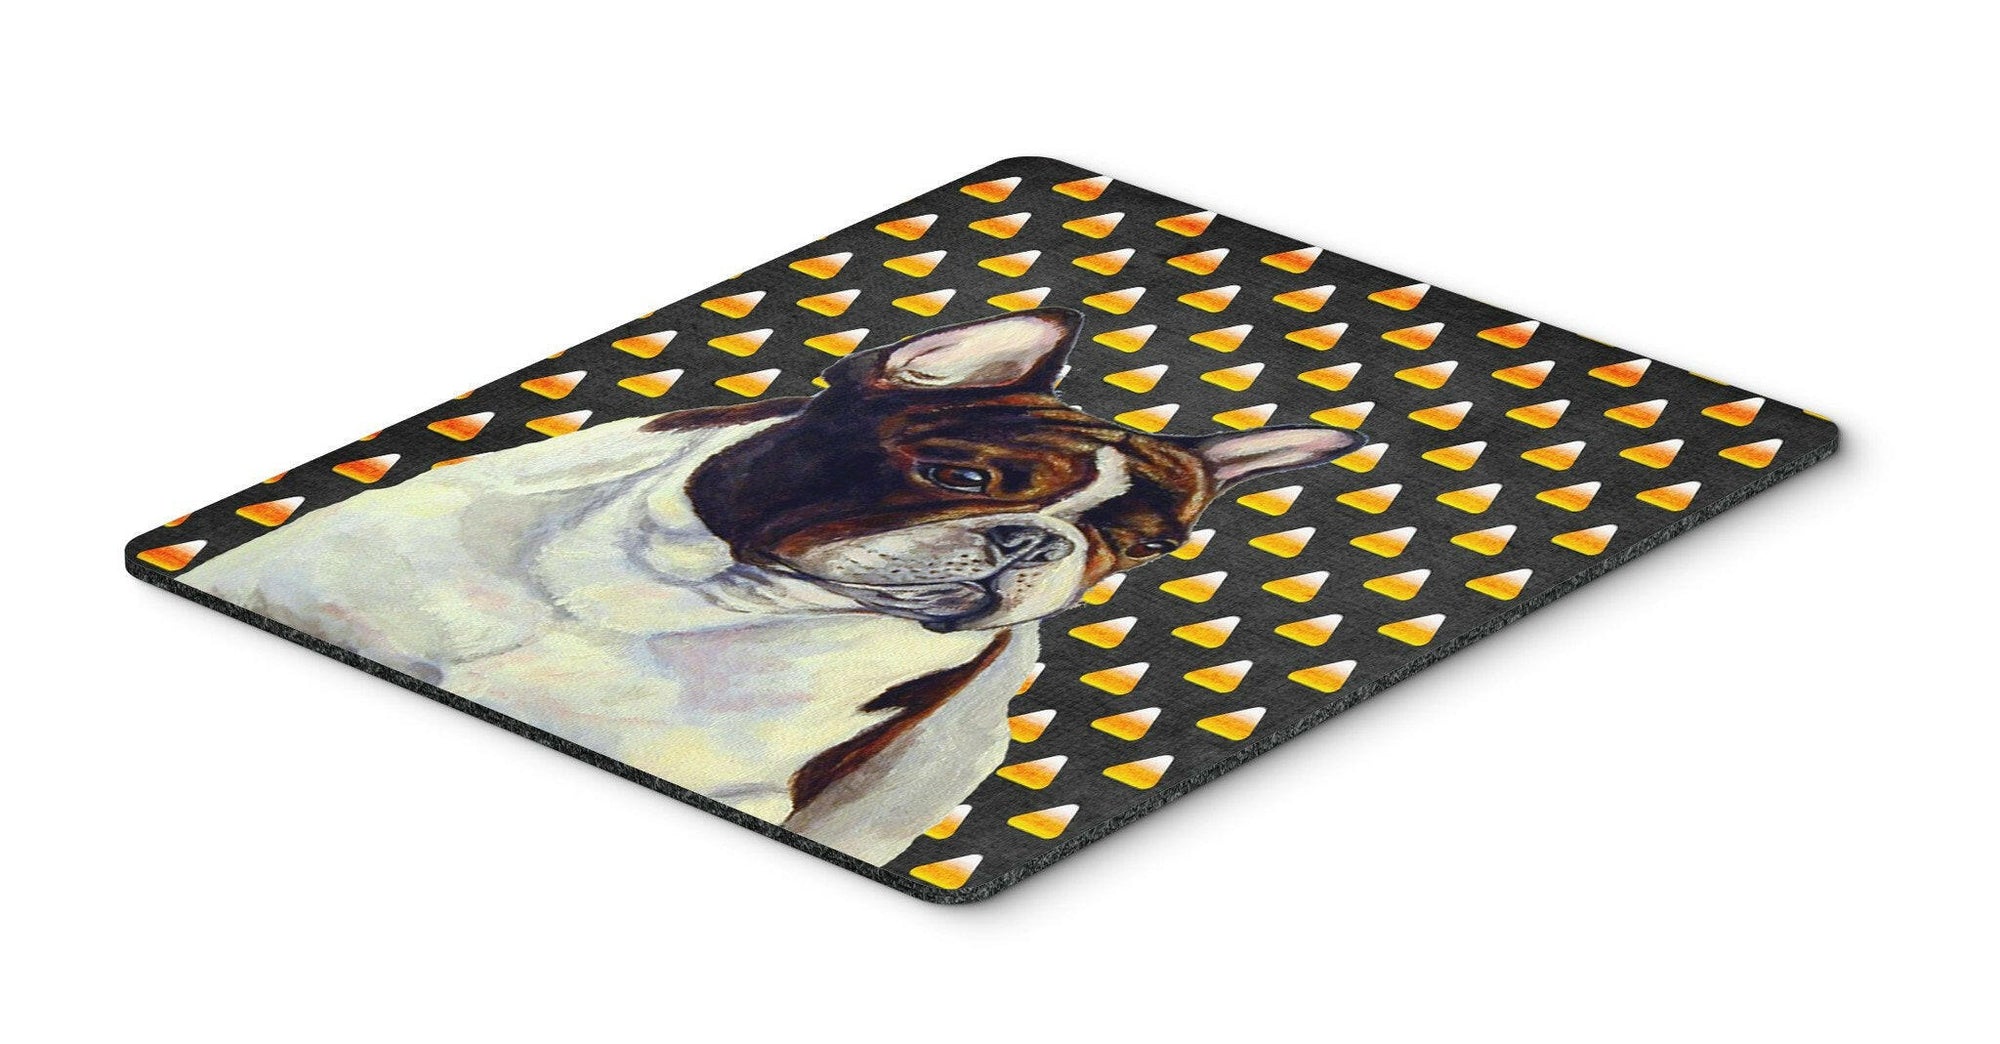 French Bulldog Candy Corn Halloween Portrait Mouse Pad, Hot Pad or Trivet by Caroline's Treasures